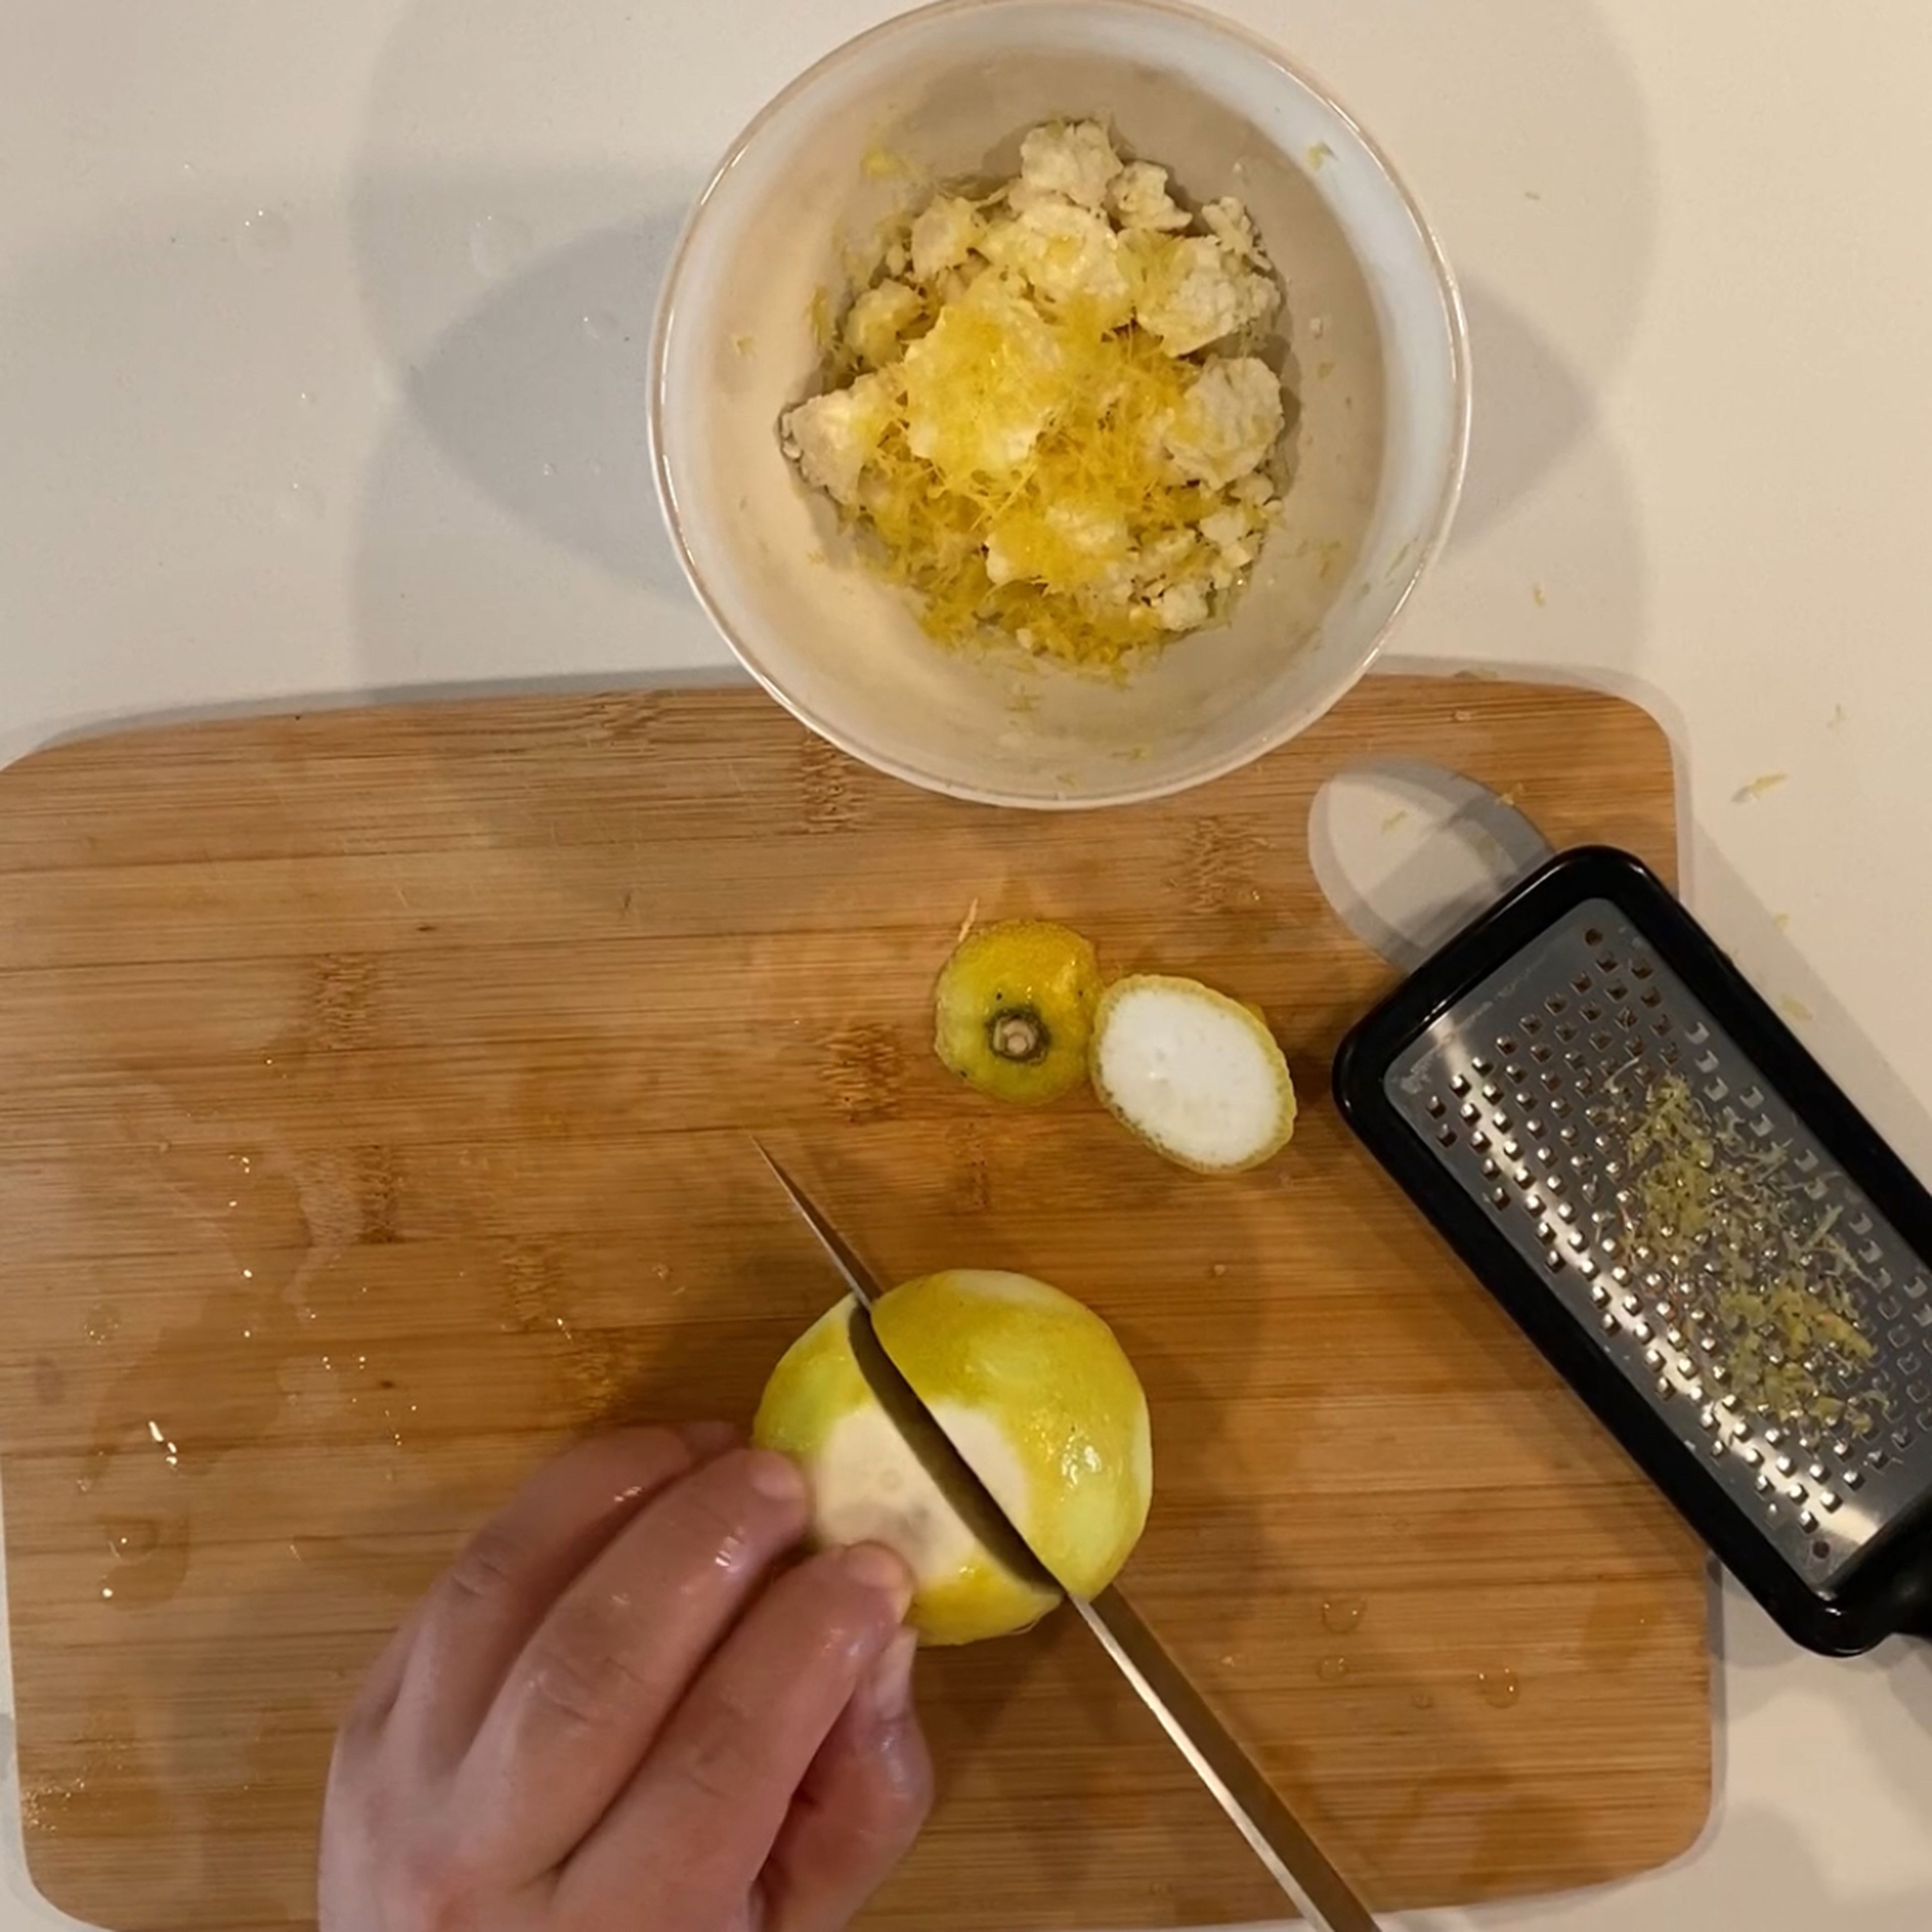 Cut lemon into 4 - 6 pieces for later use